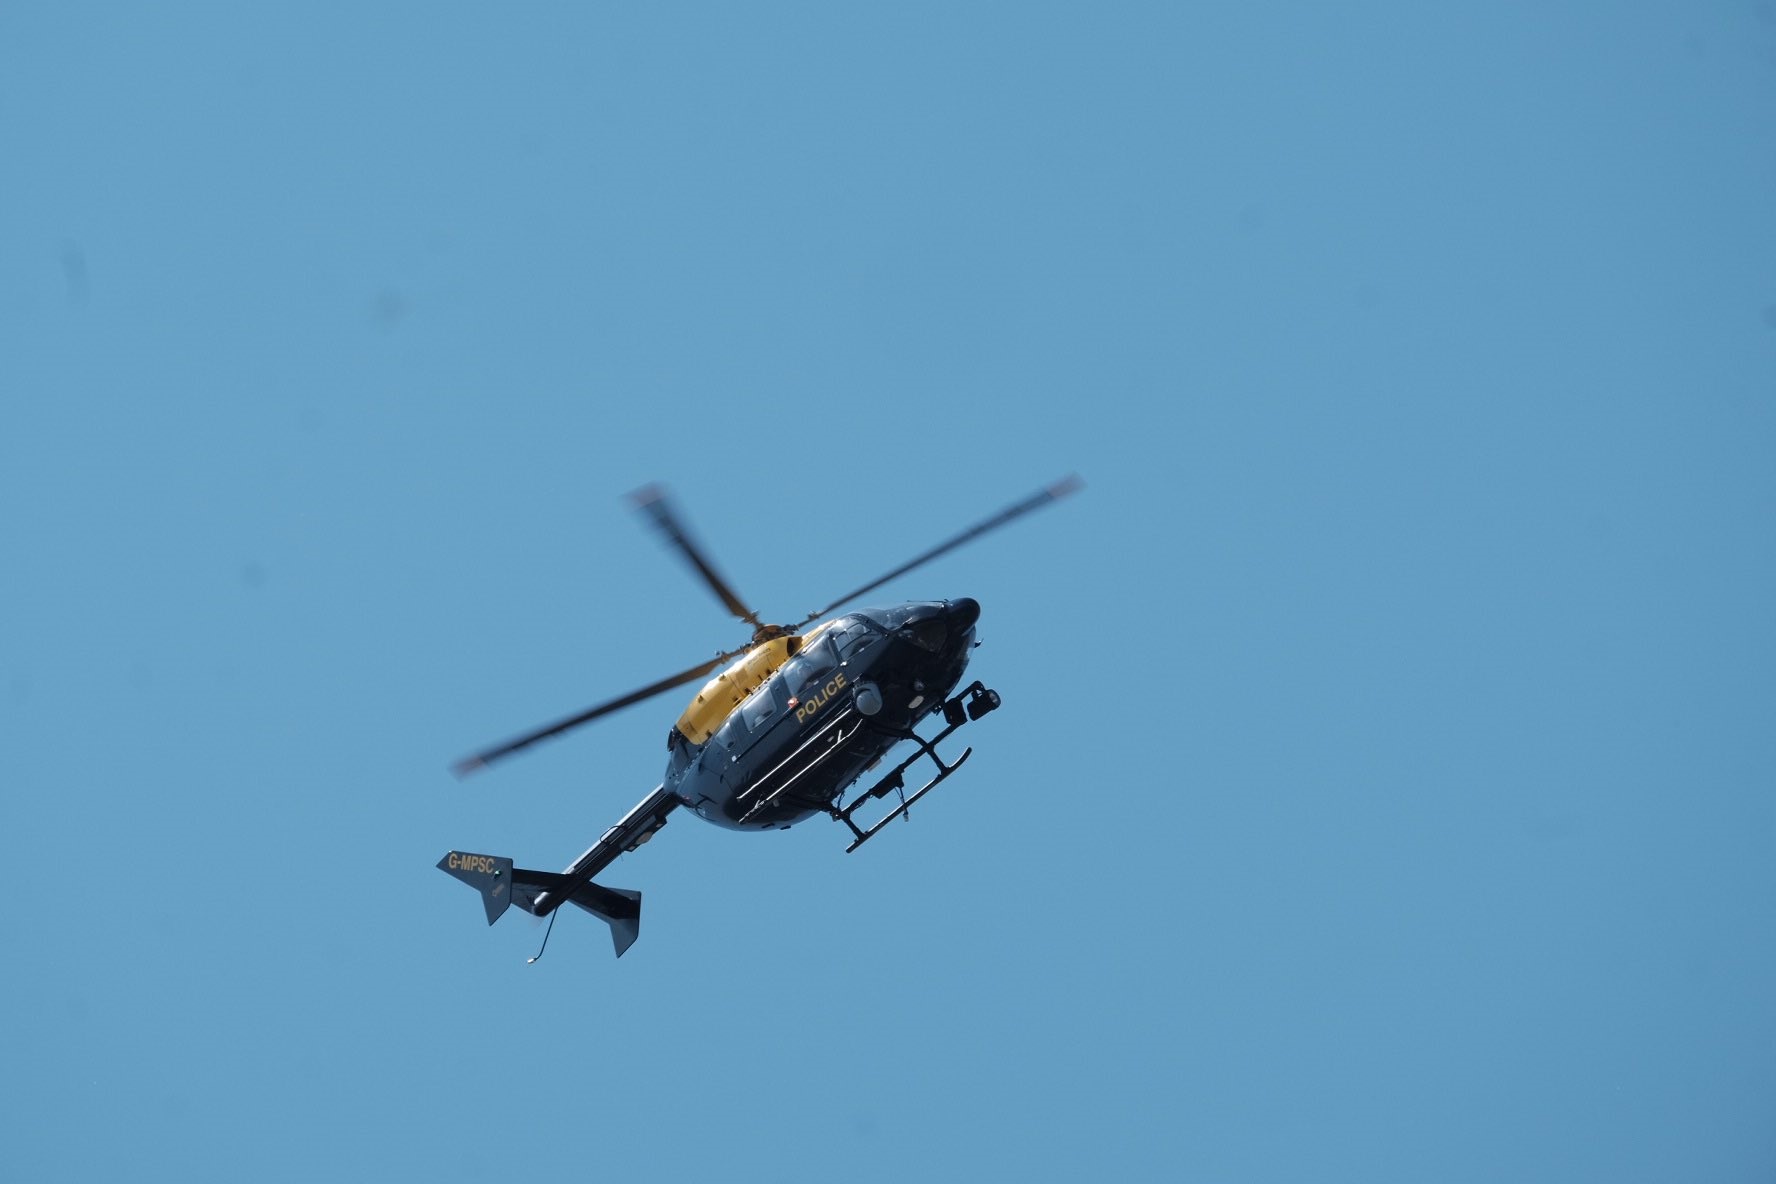 A police helicopter during Exercise Mudlark